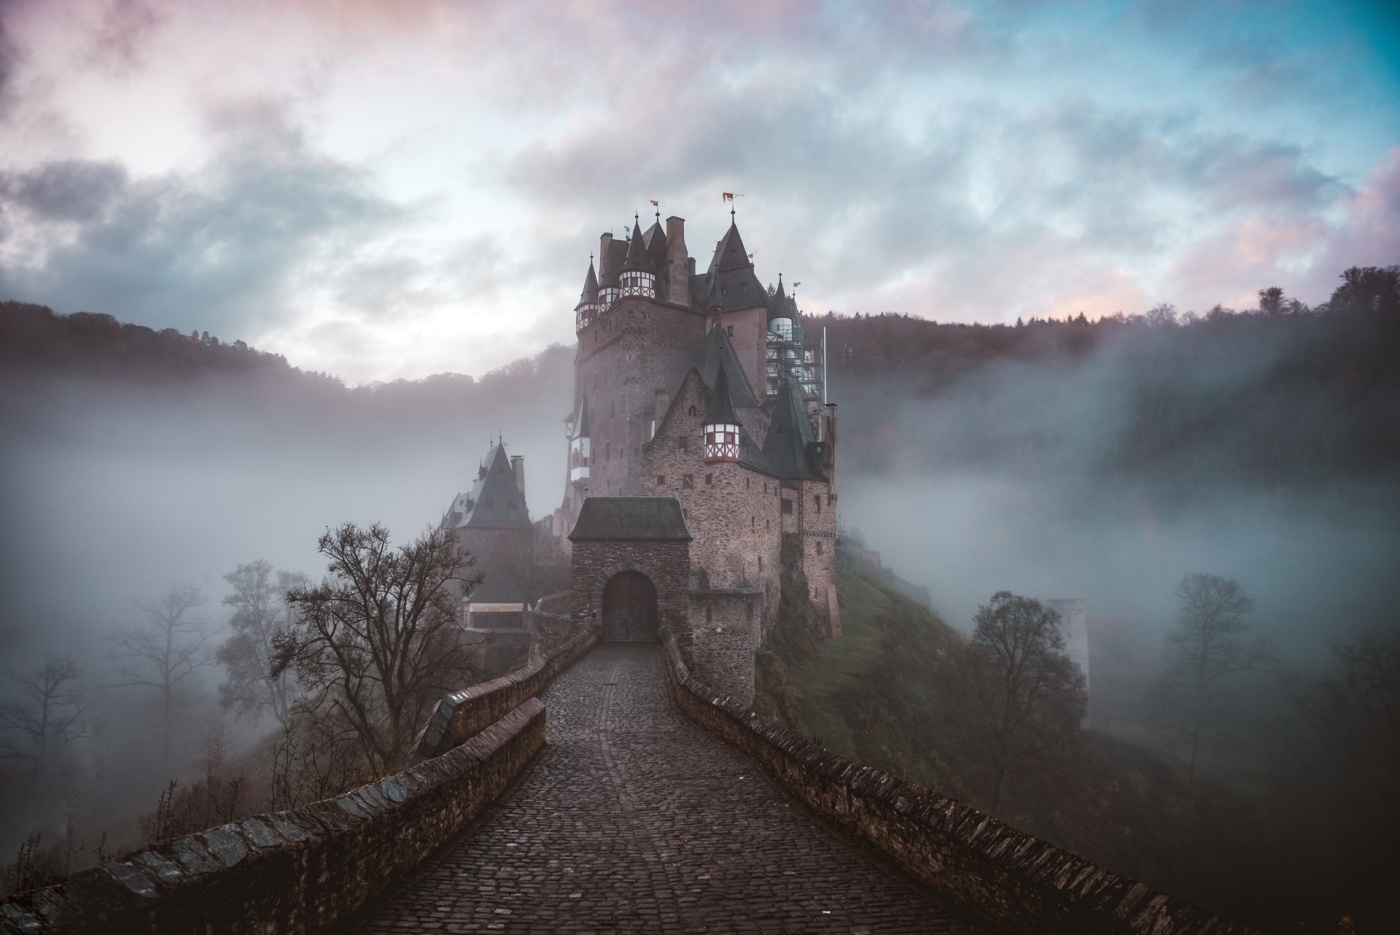 A tall, lonely castle shrouded in mist. image by Cederic Vandenberghe.